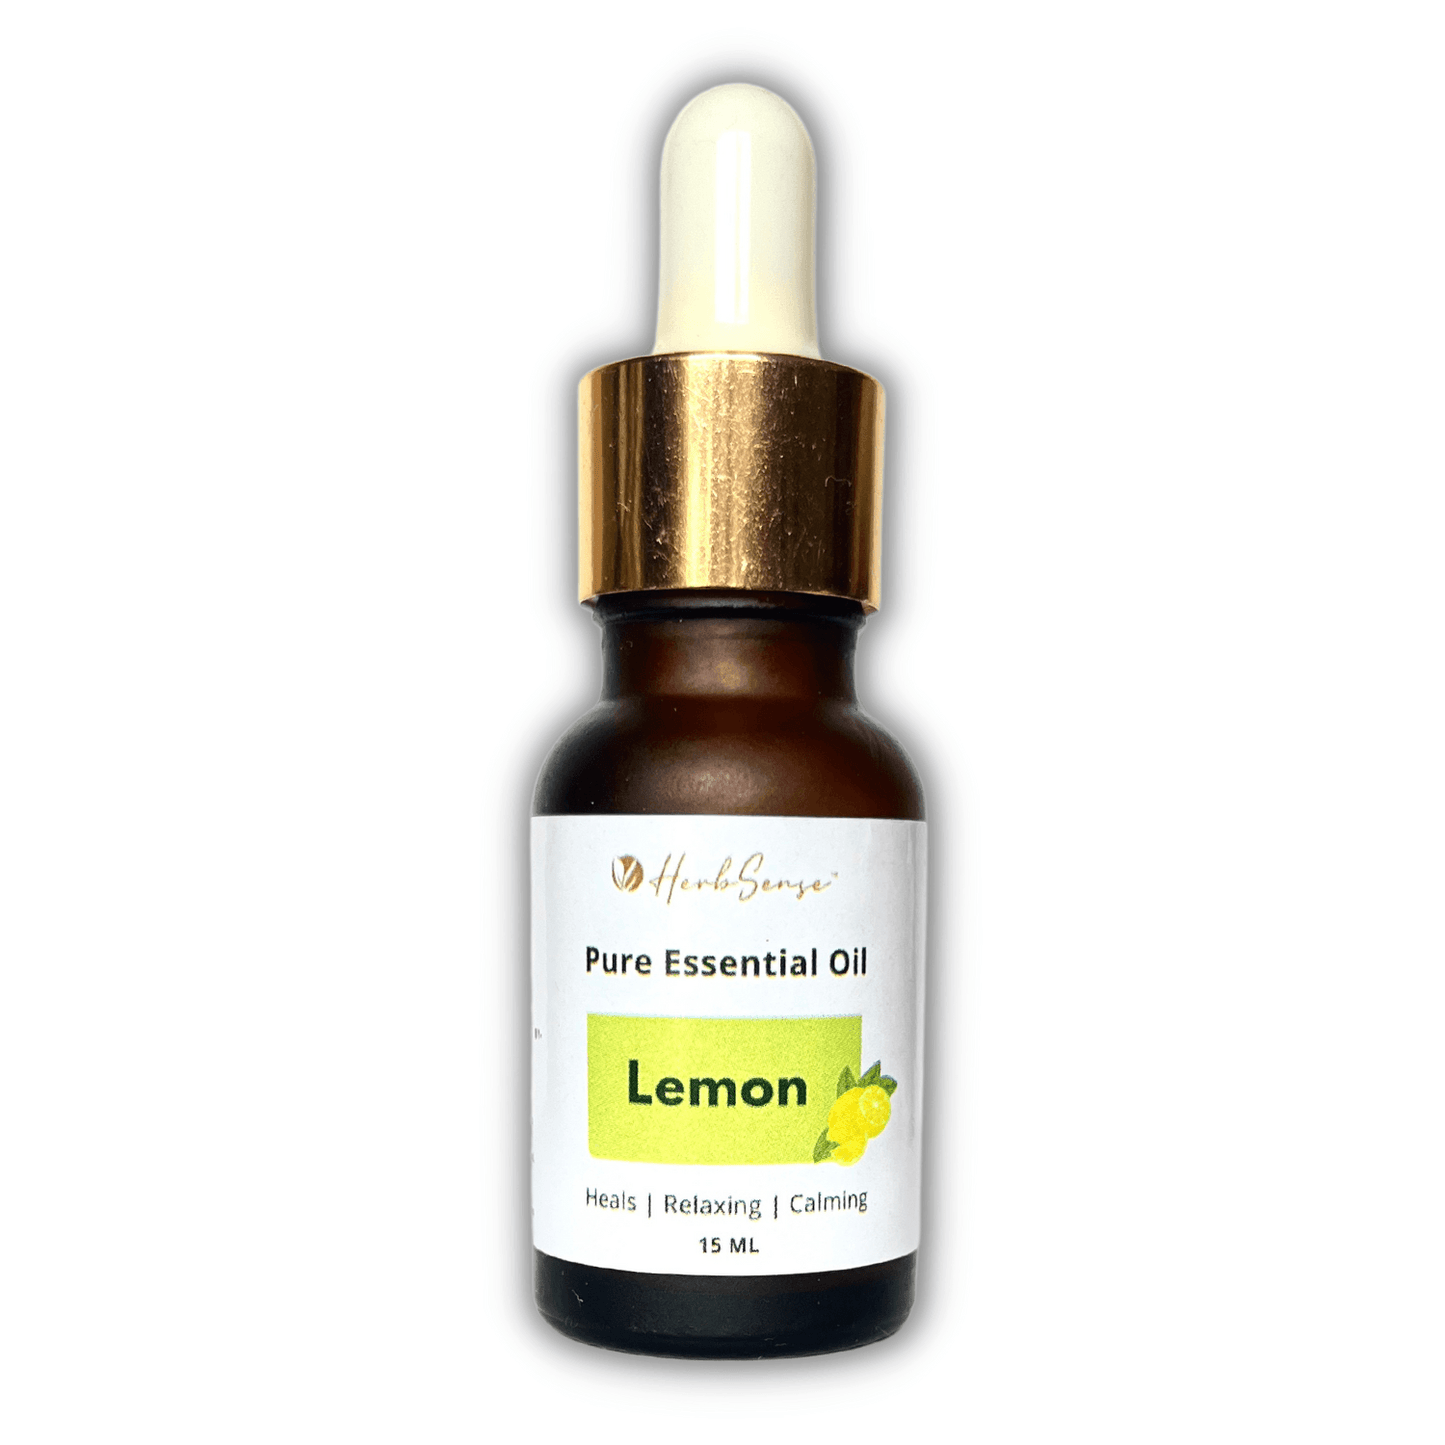 Lemon Essential Oil for Skin, Hair, Scalp, Face, Nails, Aromatherapy - 100% Pure, Natural,15 ML - Herbsense